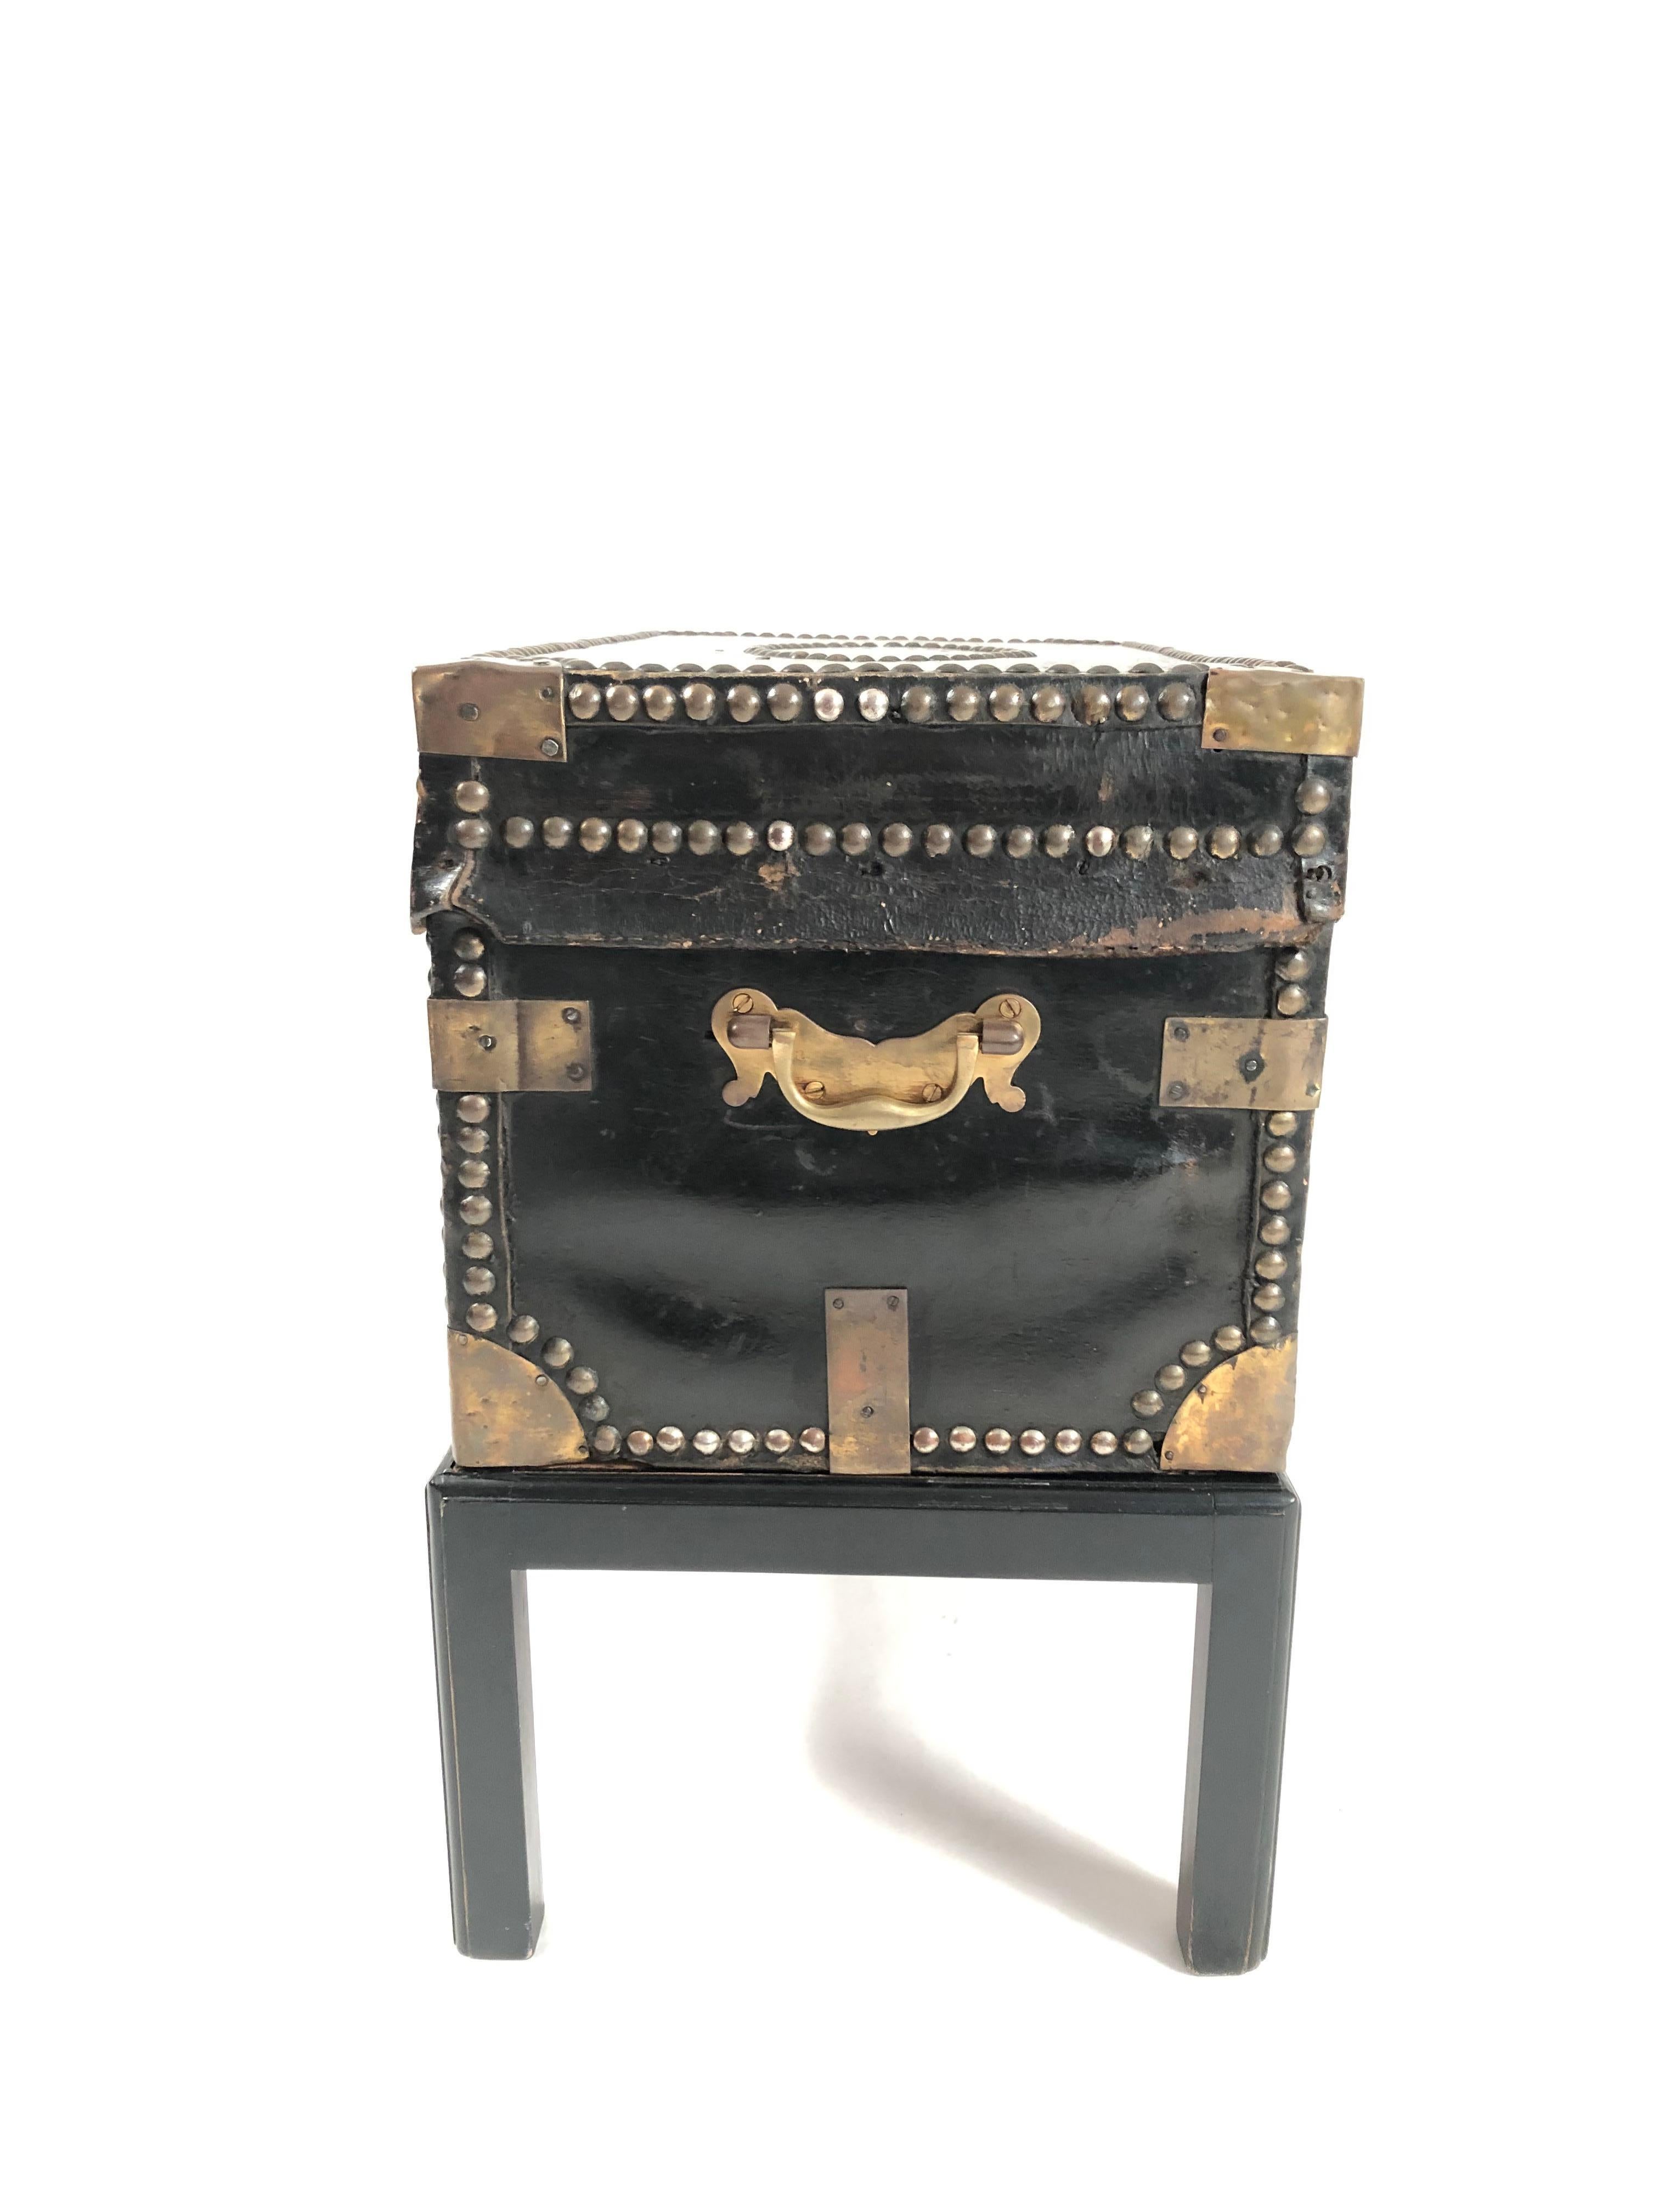 Regency Brass Stud Decorated Leather Sea Captain's Chest on Stand, circa 1810-1820